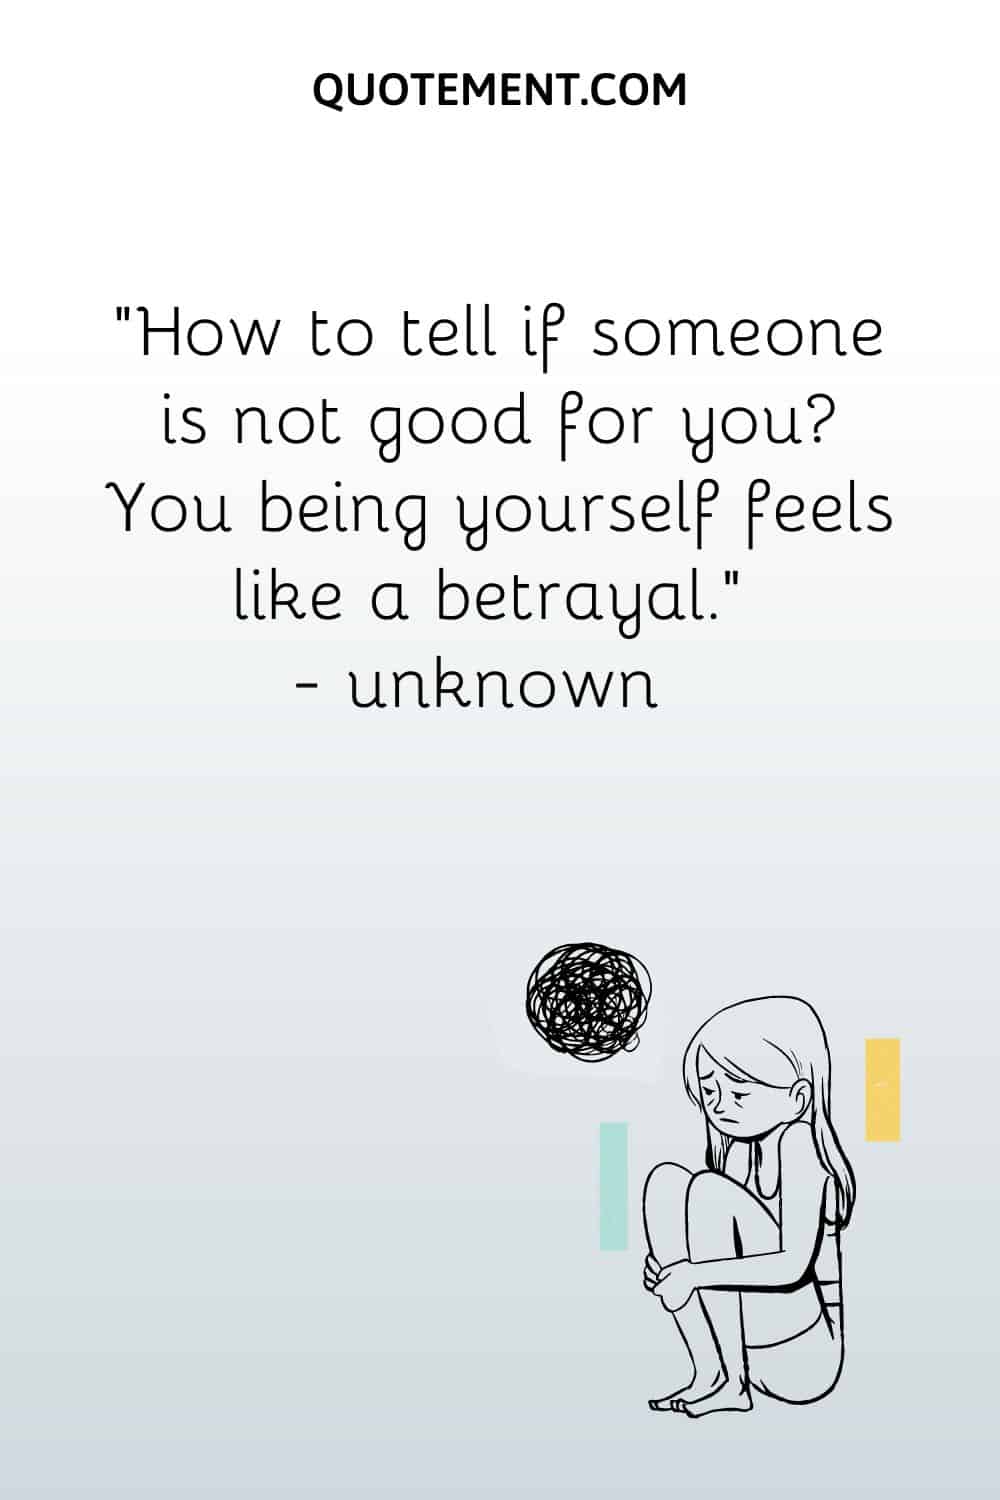 How to tell if someone is not good for you You being yourself feels like a betrayal